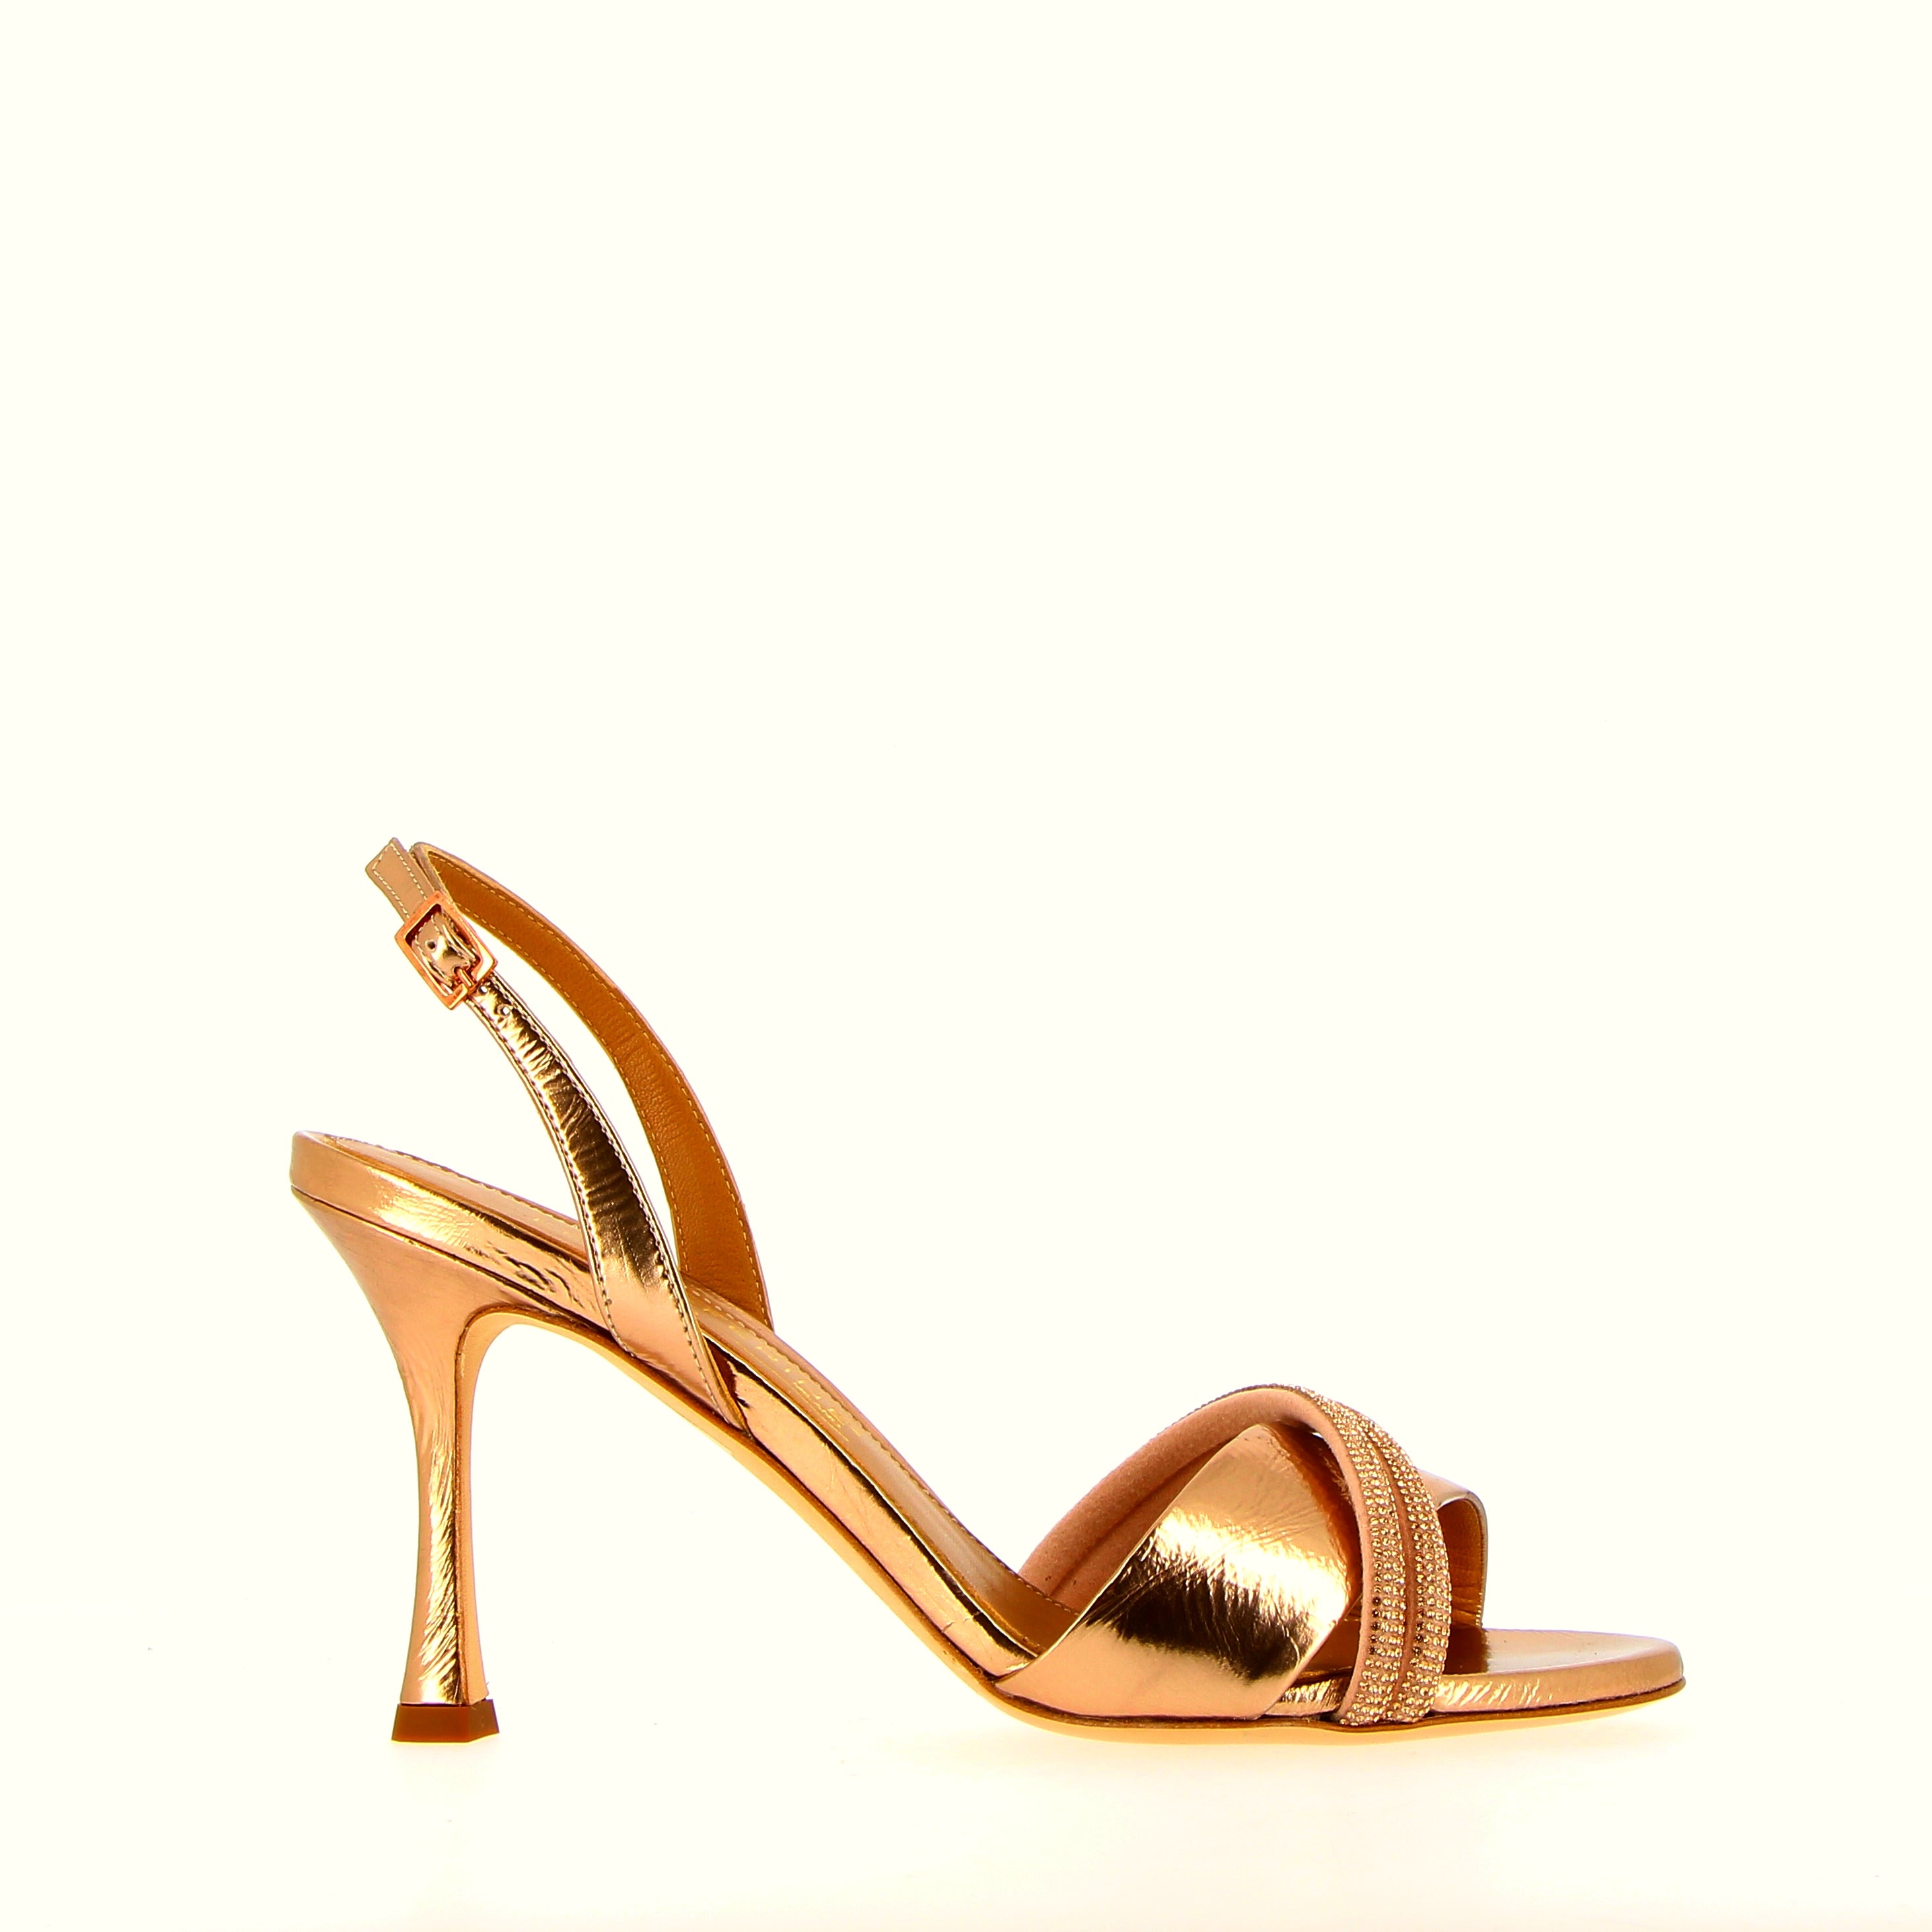 Copper sandal on heel with accessory